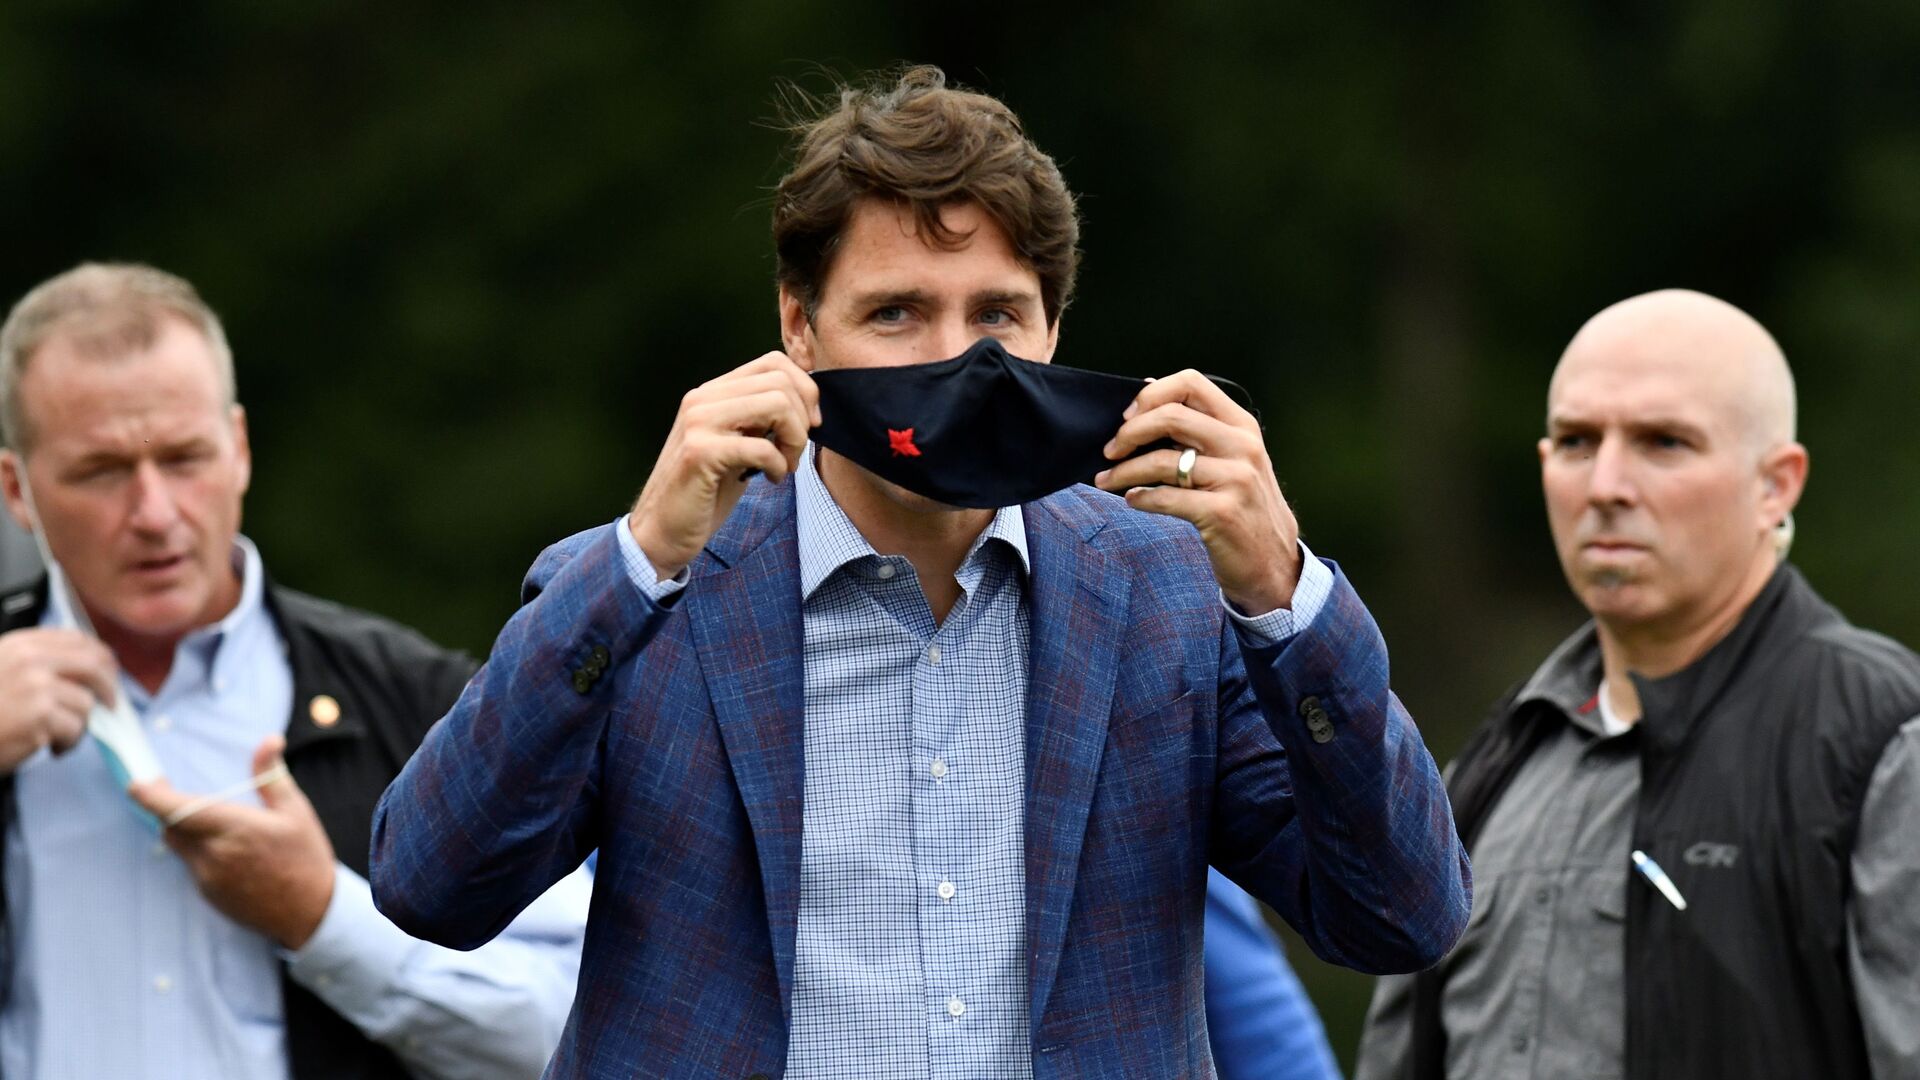 Canada's Prime Minister Justin Trudeau puts on a face mask at Town Centre Park in Coquitlam, British Columbia, Canada July 8, 2021. - Sputnik International, 1920, 10.09.2021